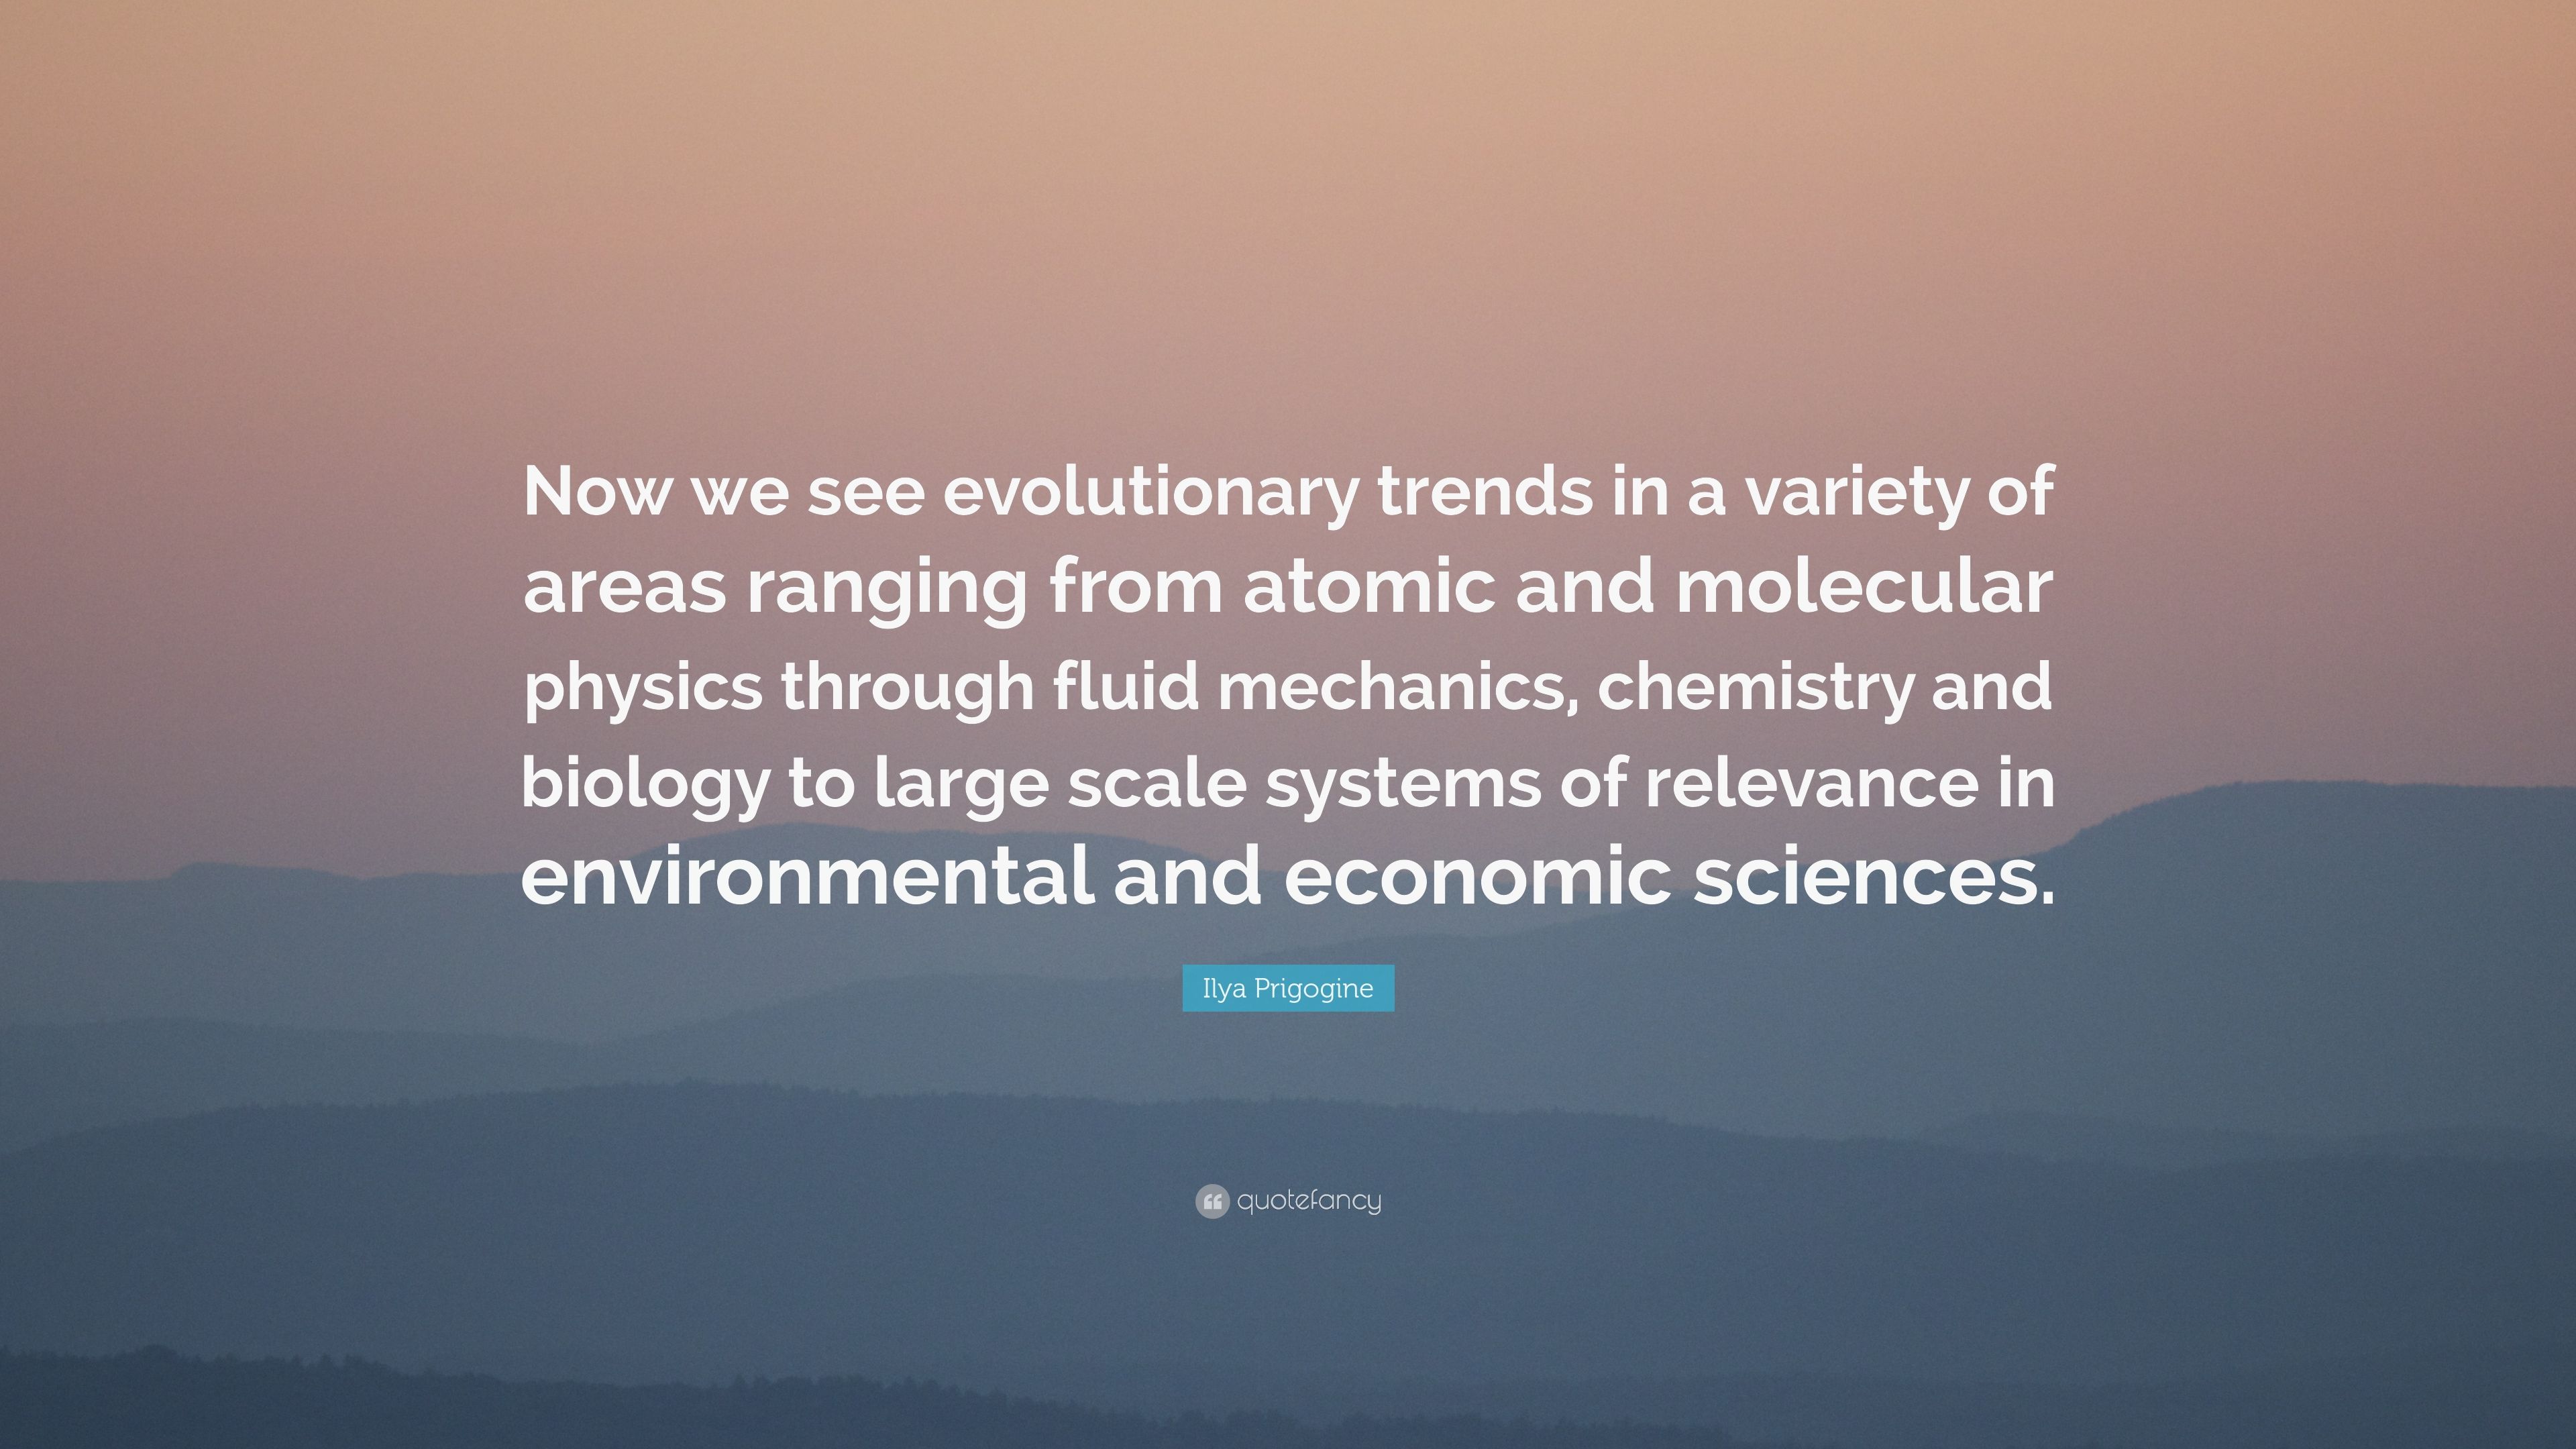 Ilya Prigogine Quote: “Now we see evolutionary trends in a variety